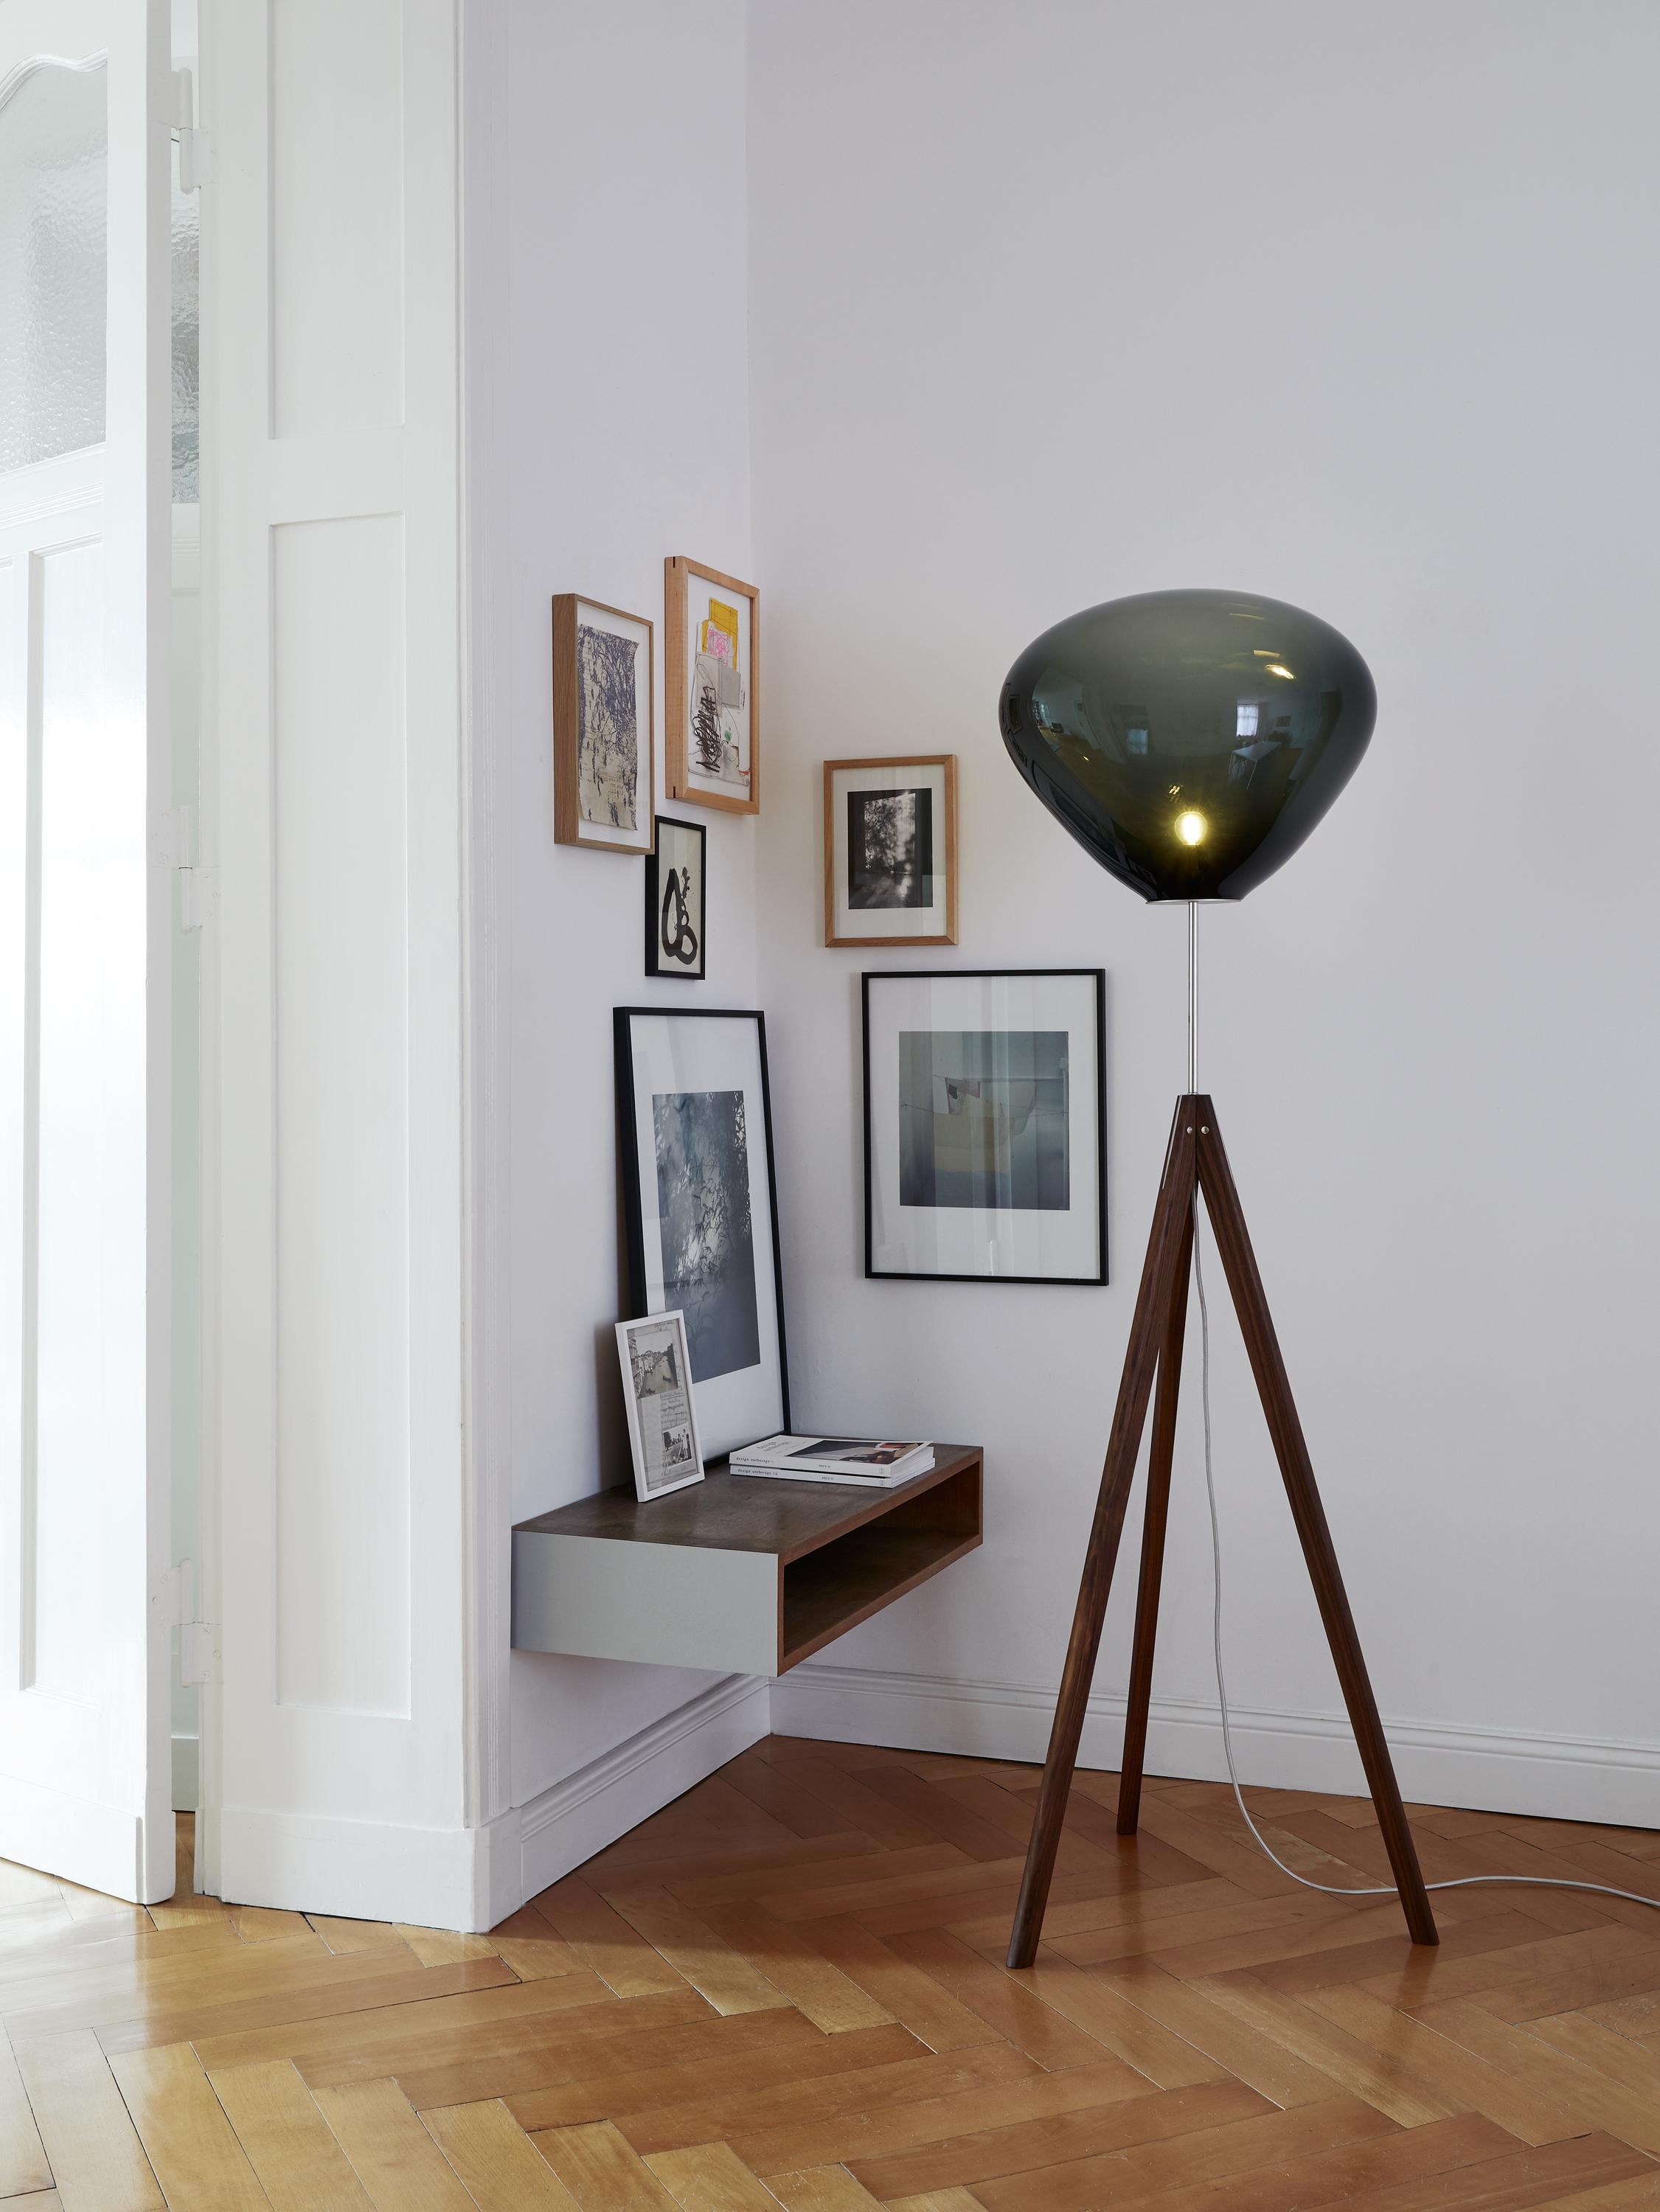 Planet X Ground Lamp, Hand-Blown Murano Glass, 2021, Floor Lighting XXL  Size For Sale at 1stDibs